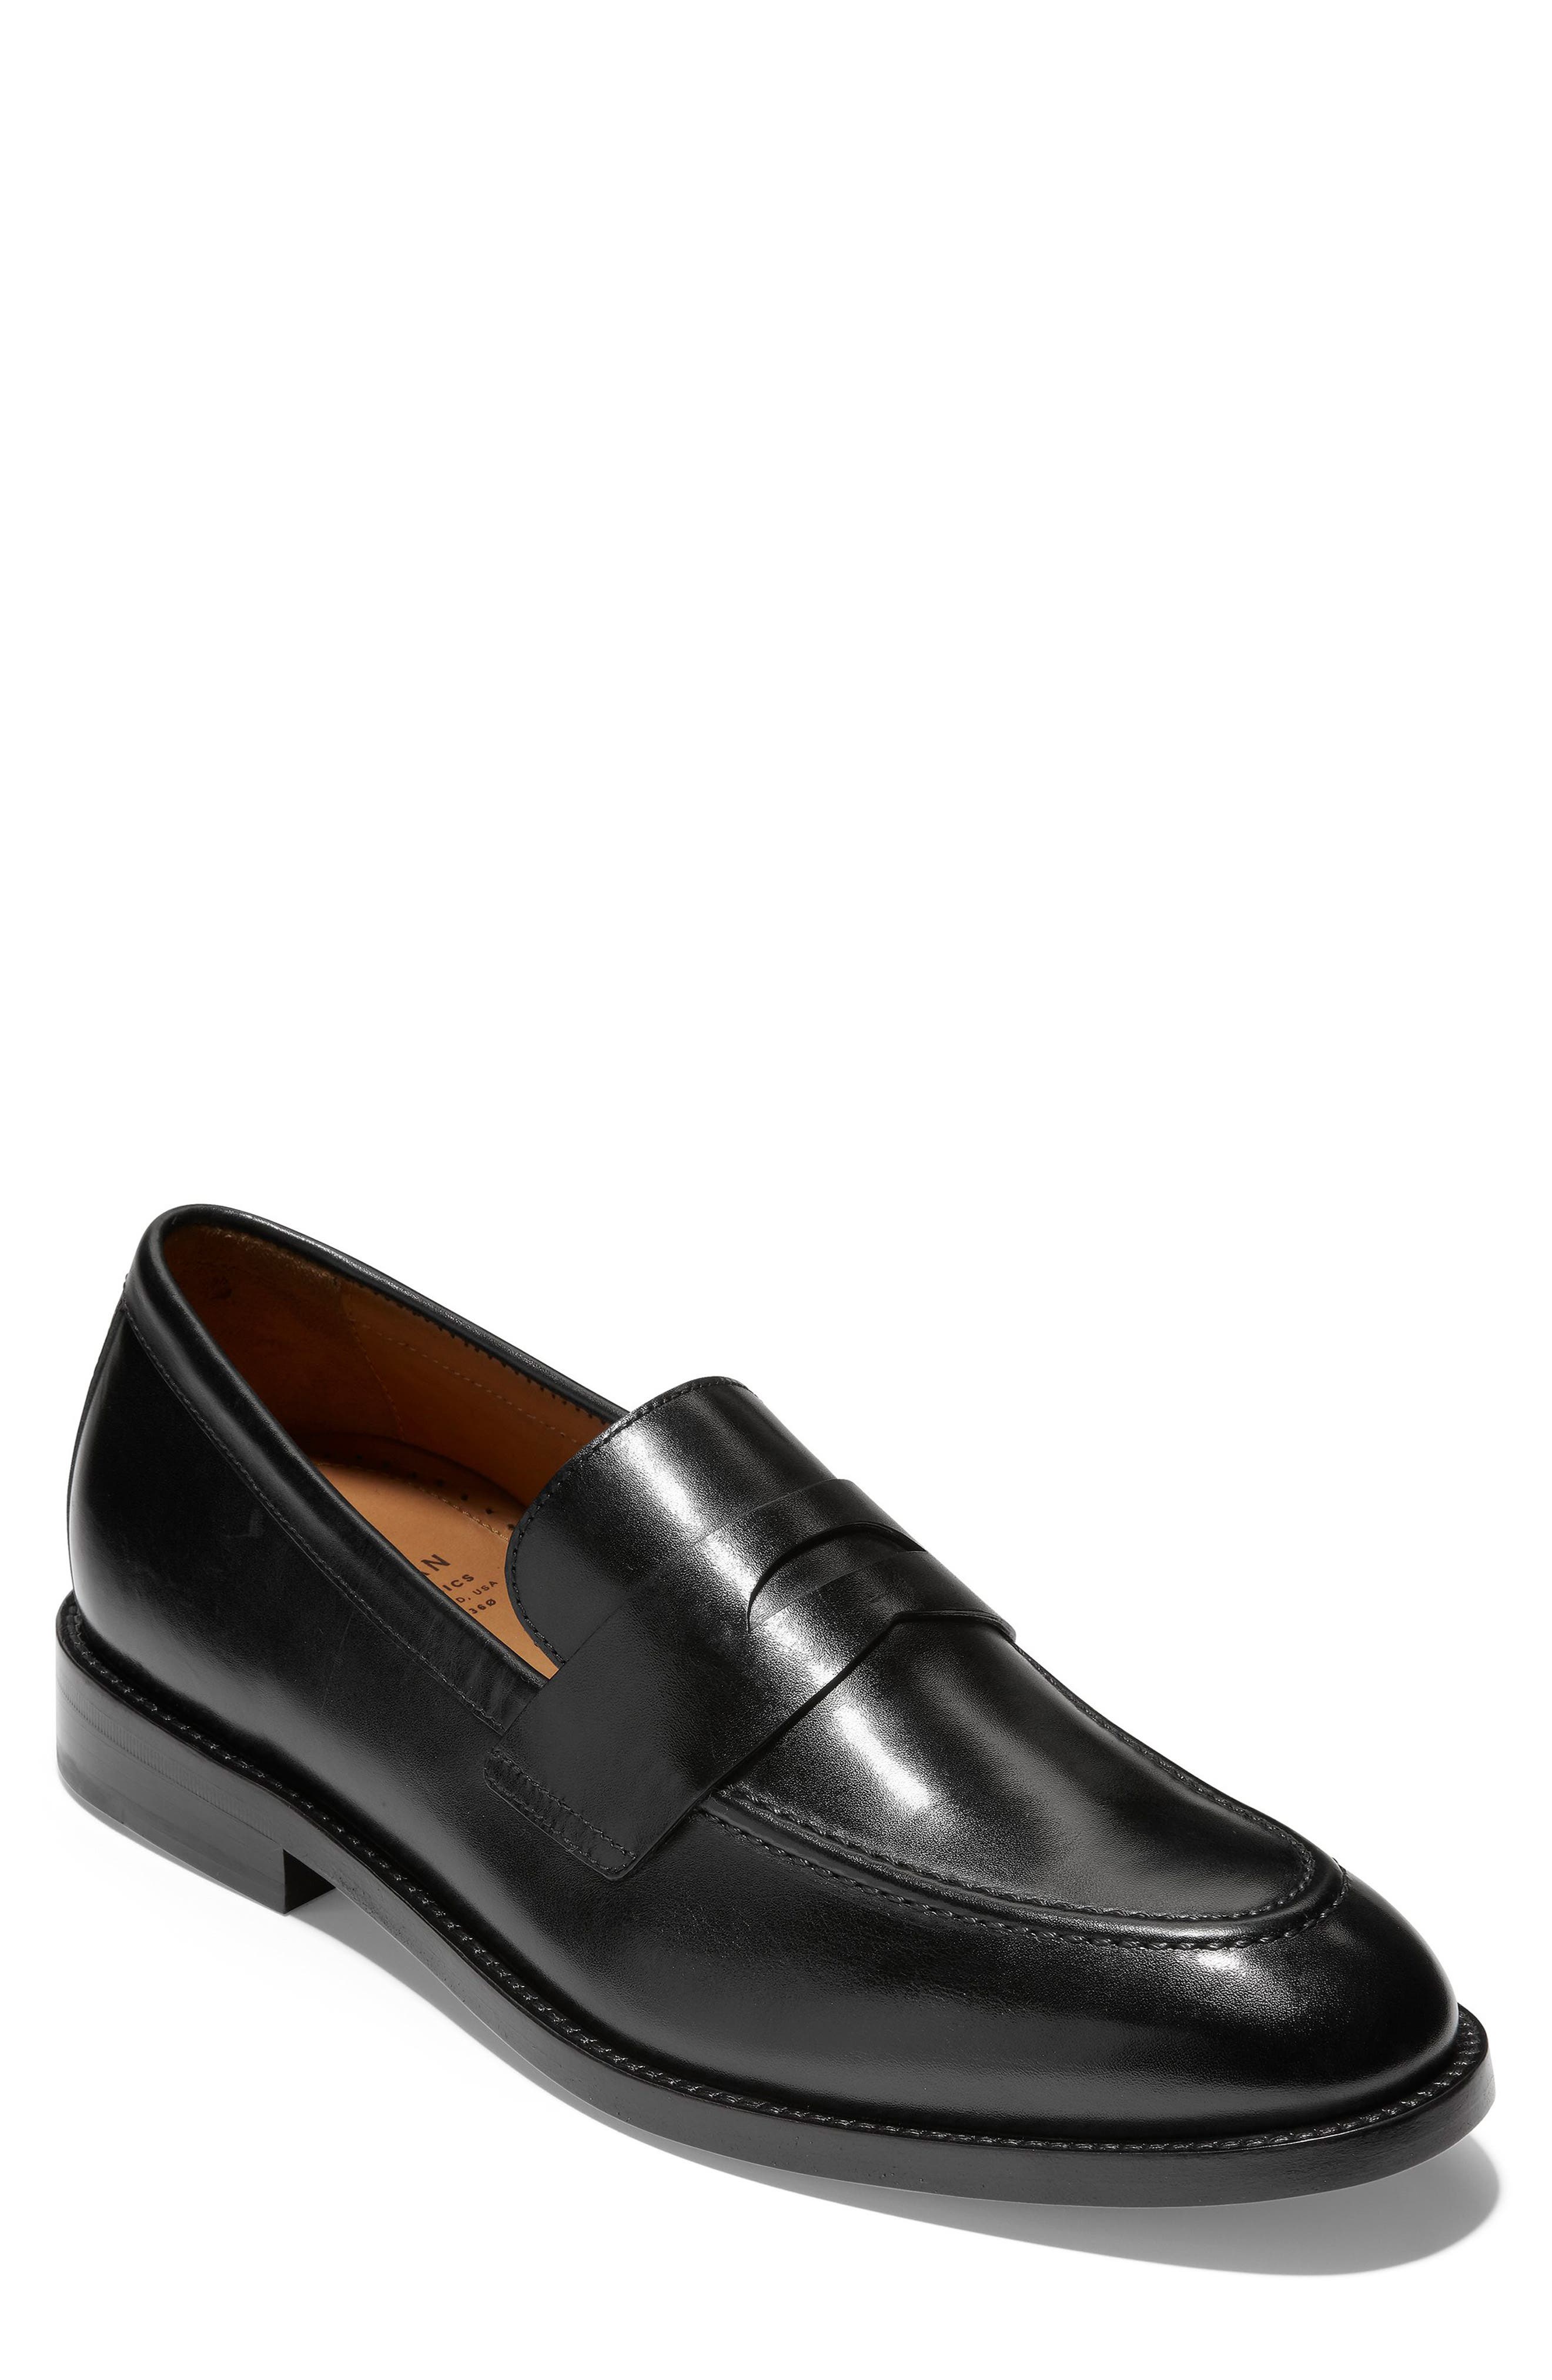 american penny loafers